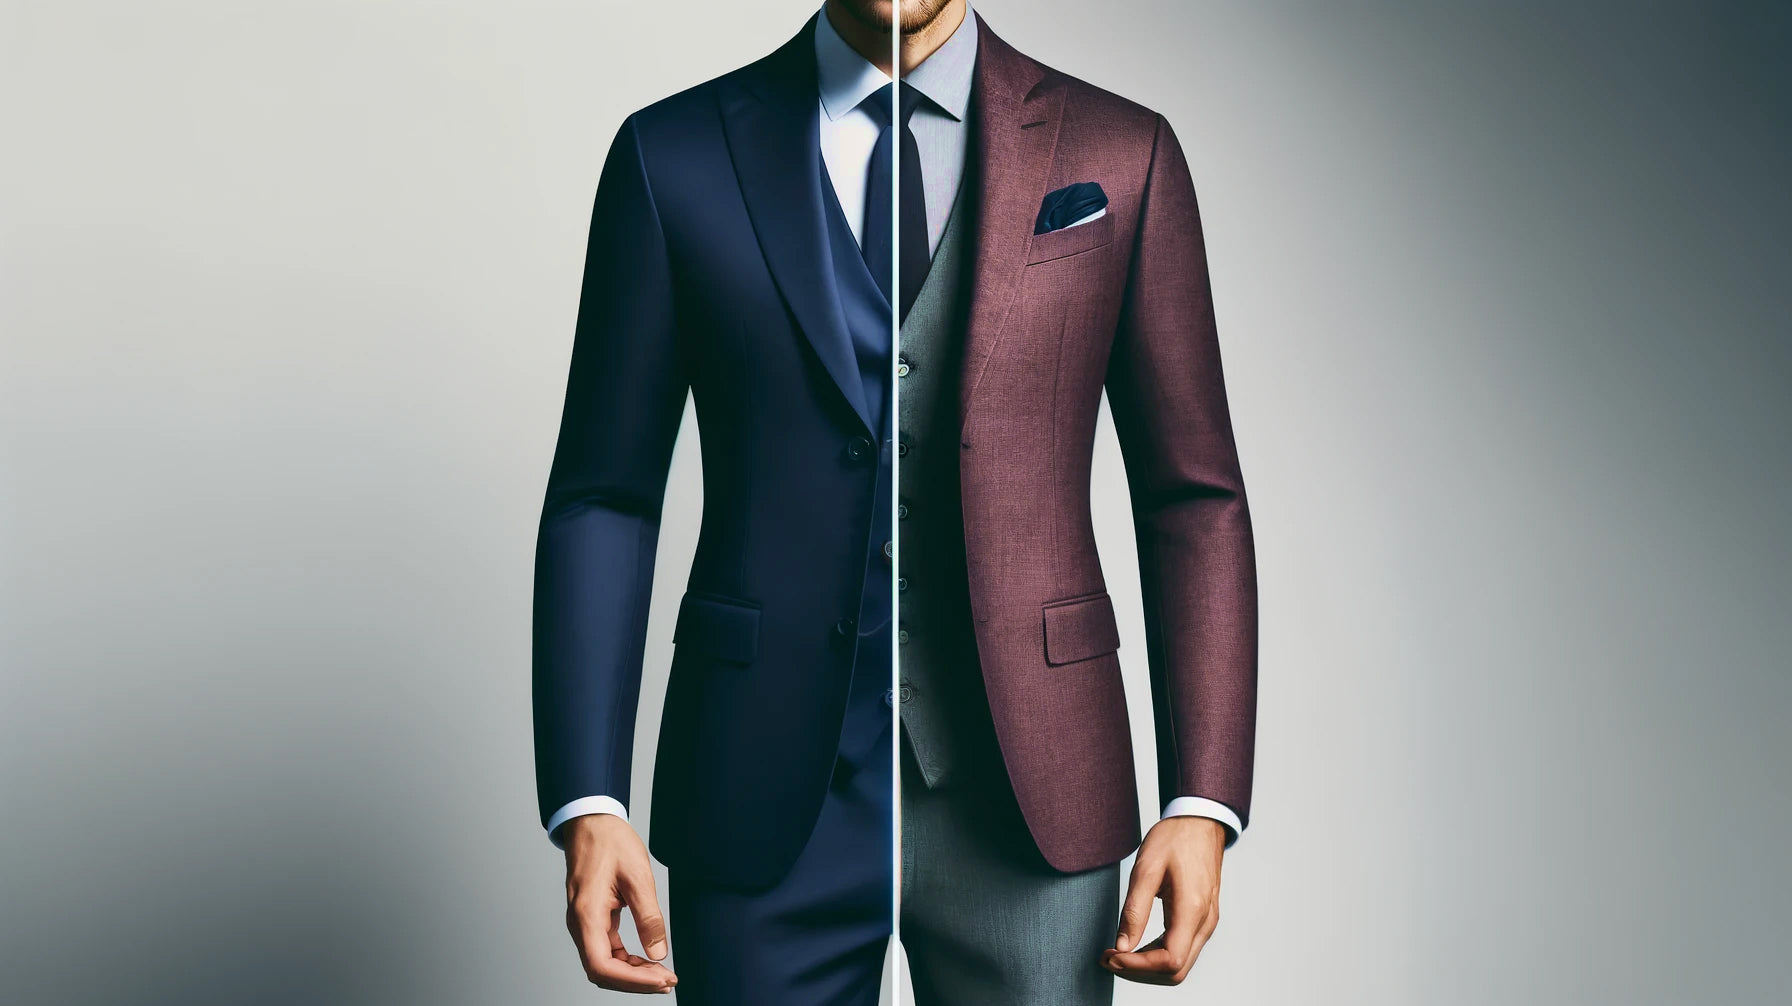 The Versatility of Bespoke Tailored Clothing